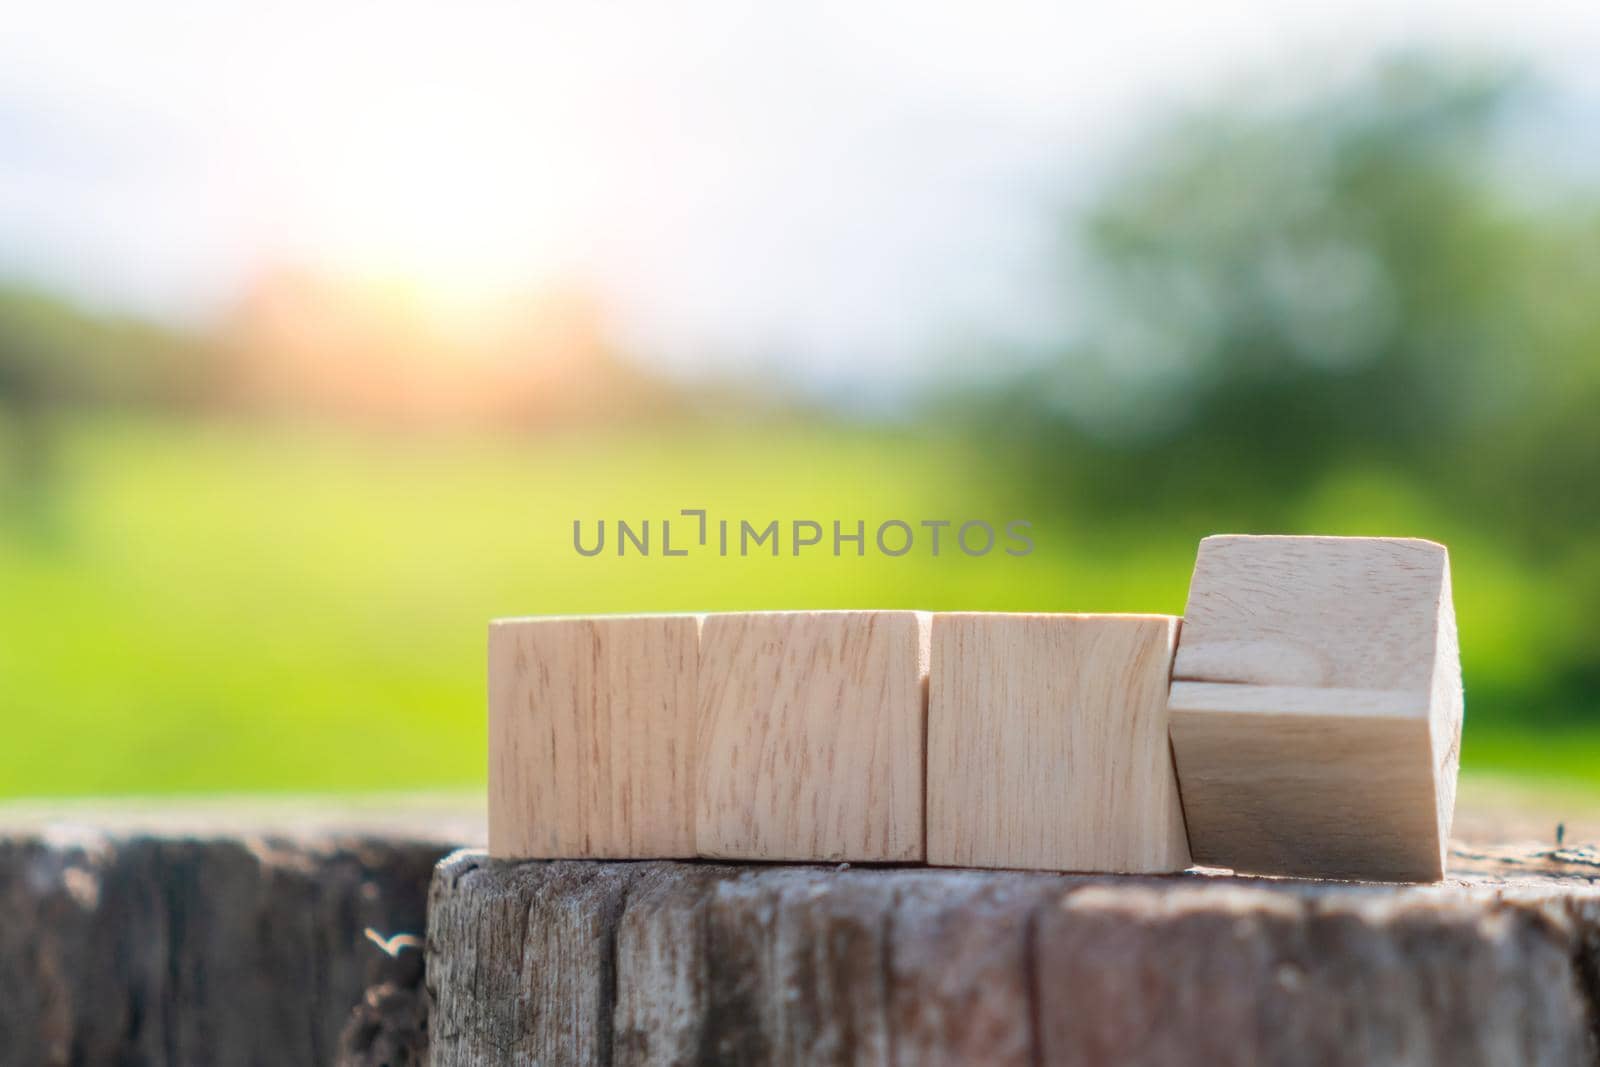 In a hand-held background, a blank wooden cube can be used to add text. by Suwant